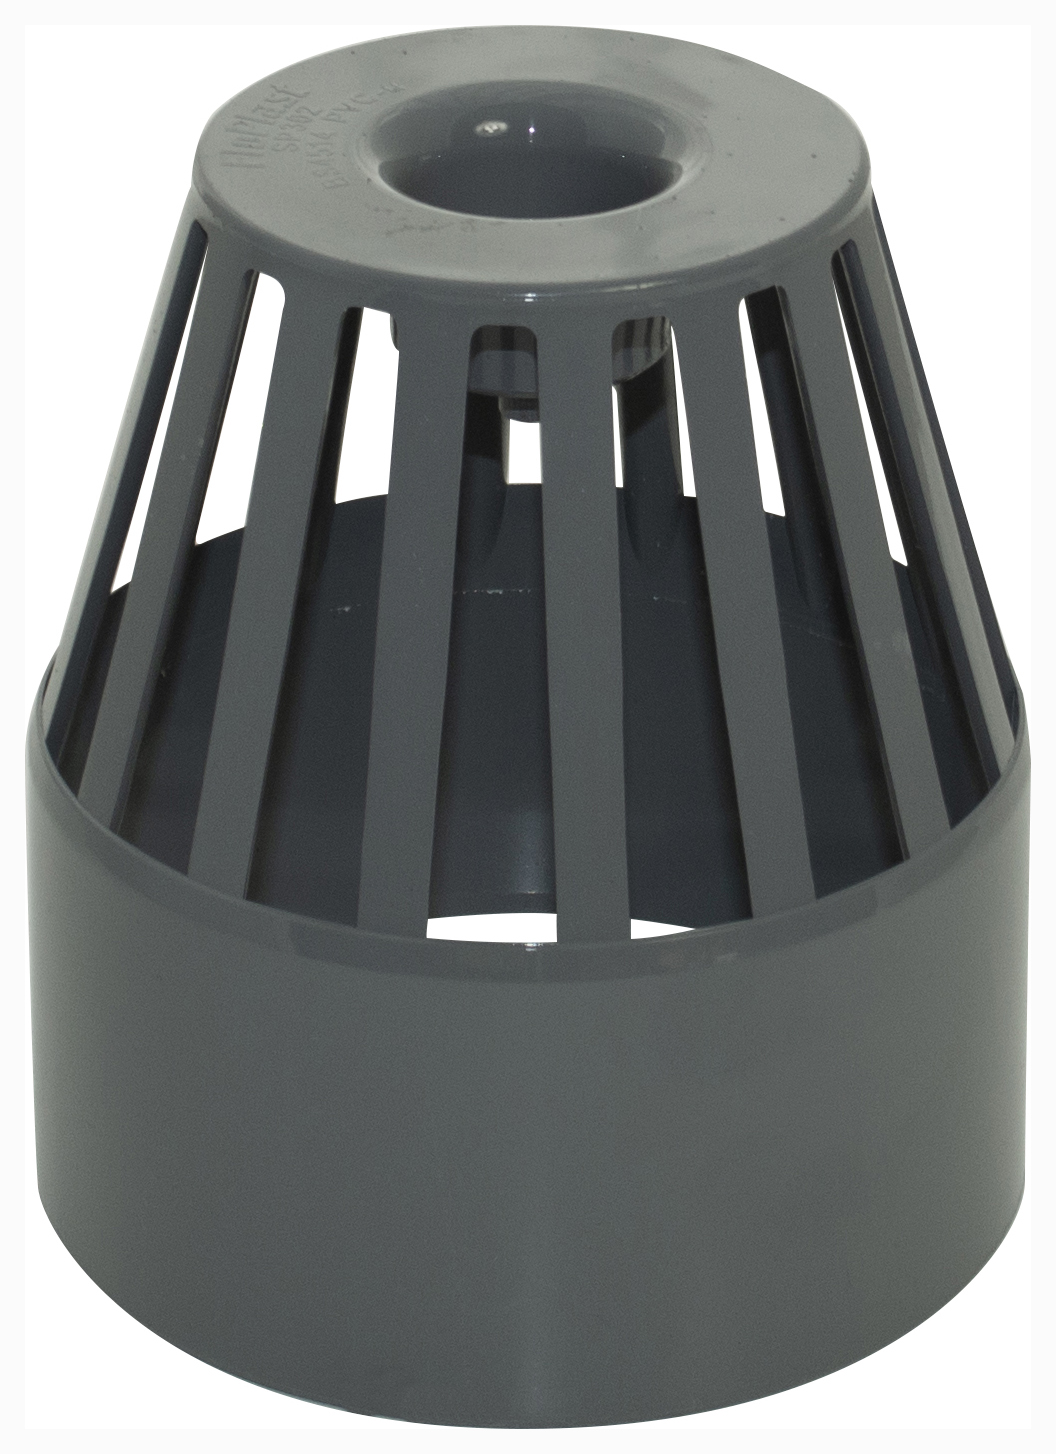 Image of Floplast 110mm Soil Pipe Vent Terminal - Anthracite Grey